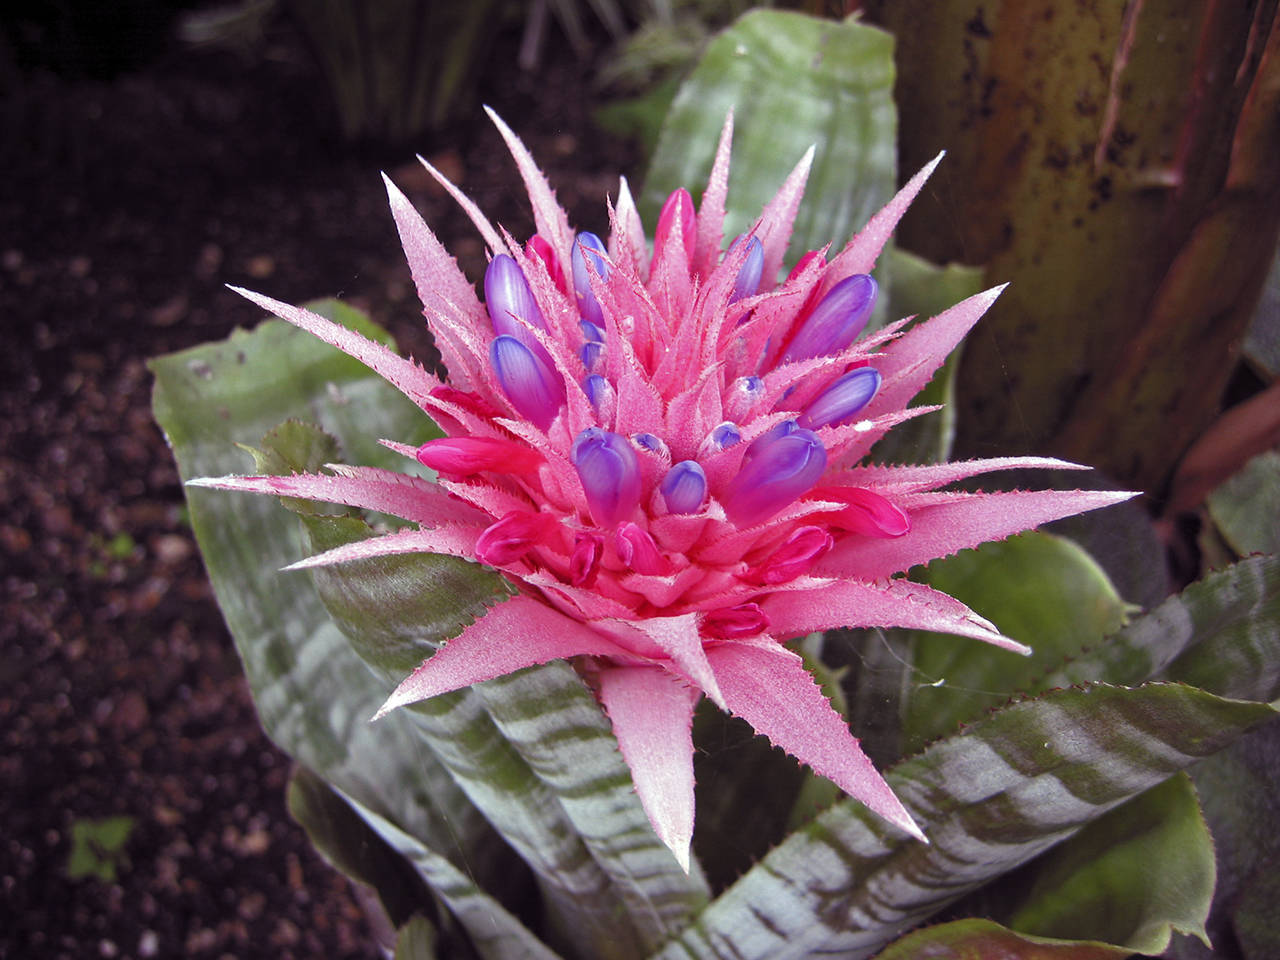 Paul & Aline Burland photo                                Once called urn plants, the Aechmea have a deep tank from which grows one 6- to 12-inch inflorescence with pink or red bracts often forming a reverse rosette.